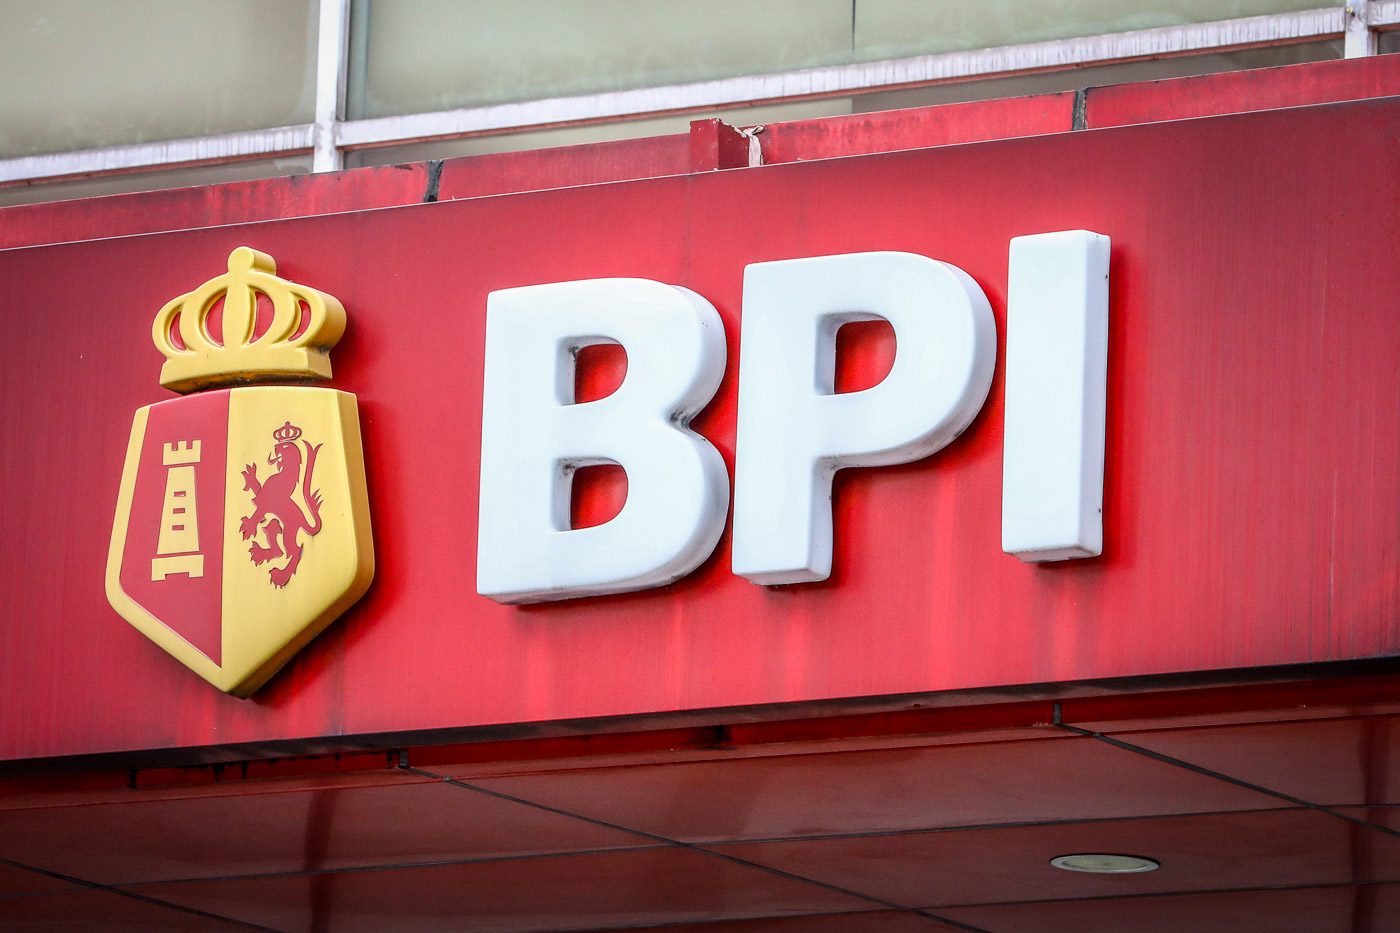 BPI launches new banking app with ‘AI-powered insights’